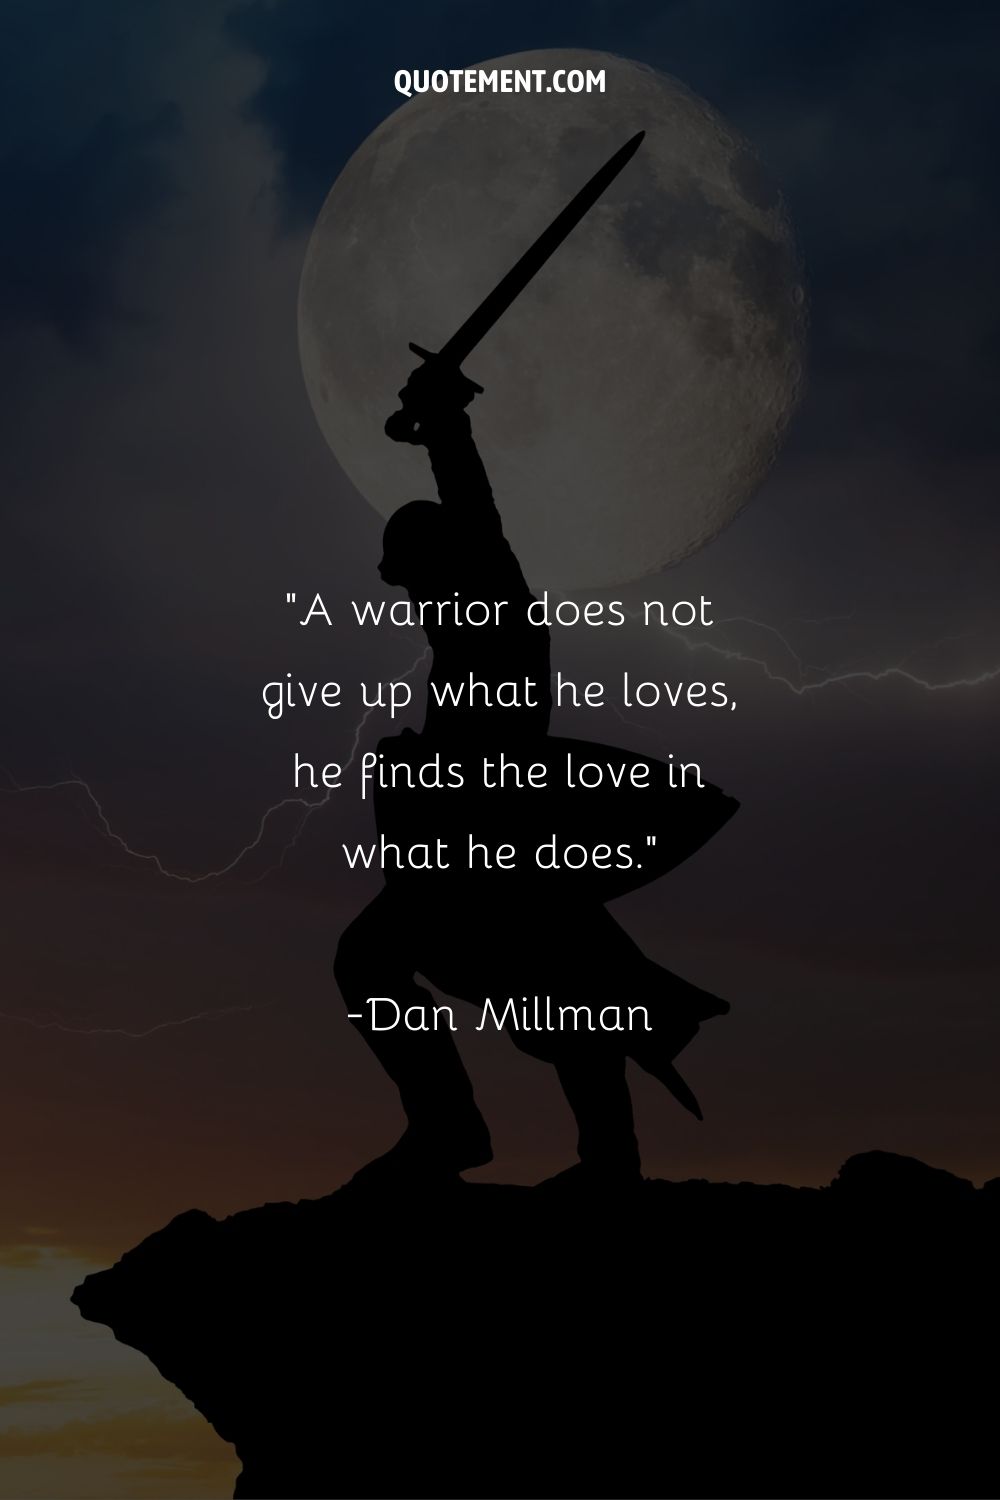 A silhouette of a warrior holding a sword representing the top warrior quote